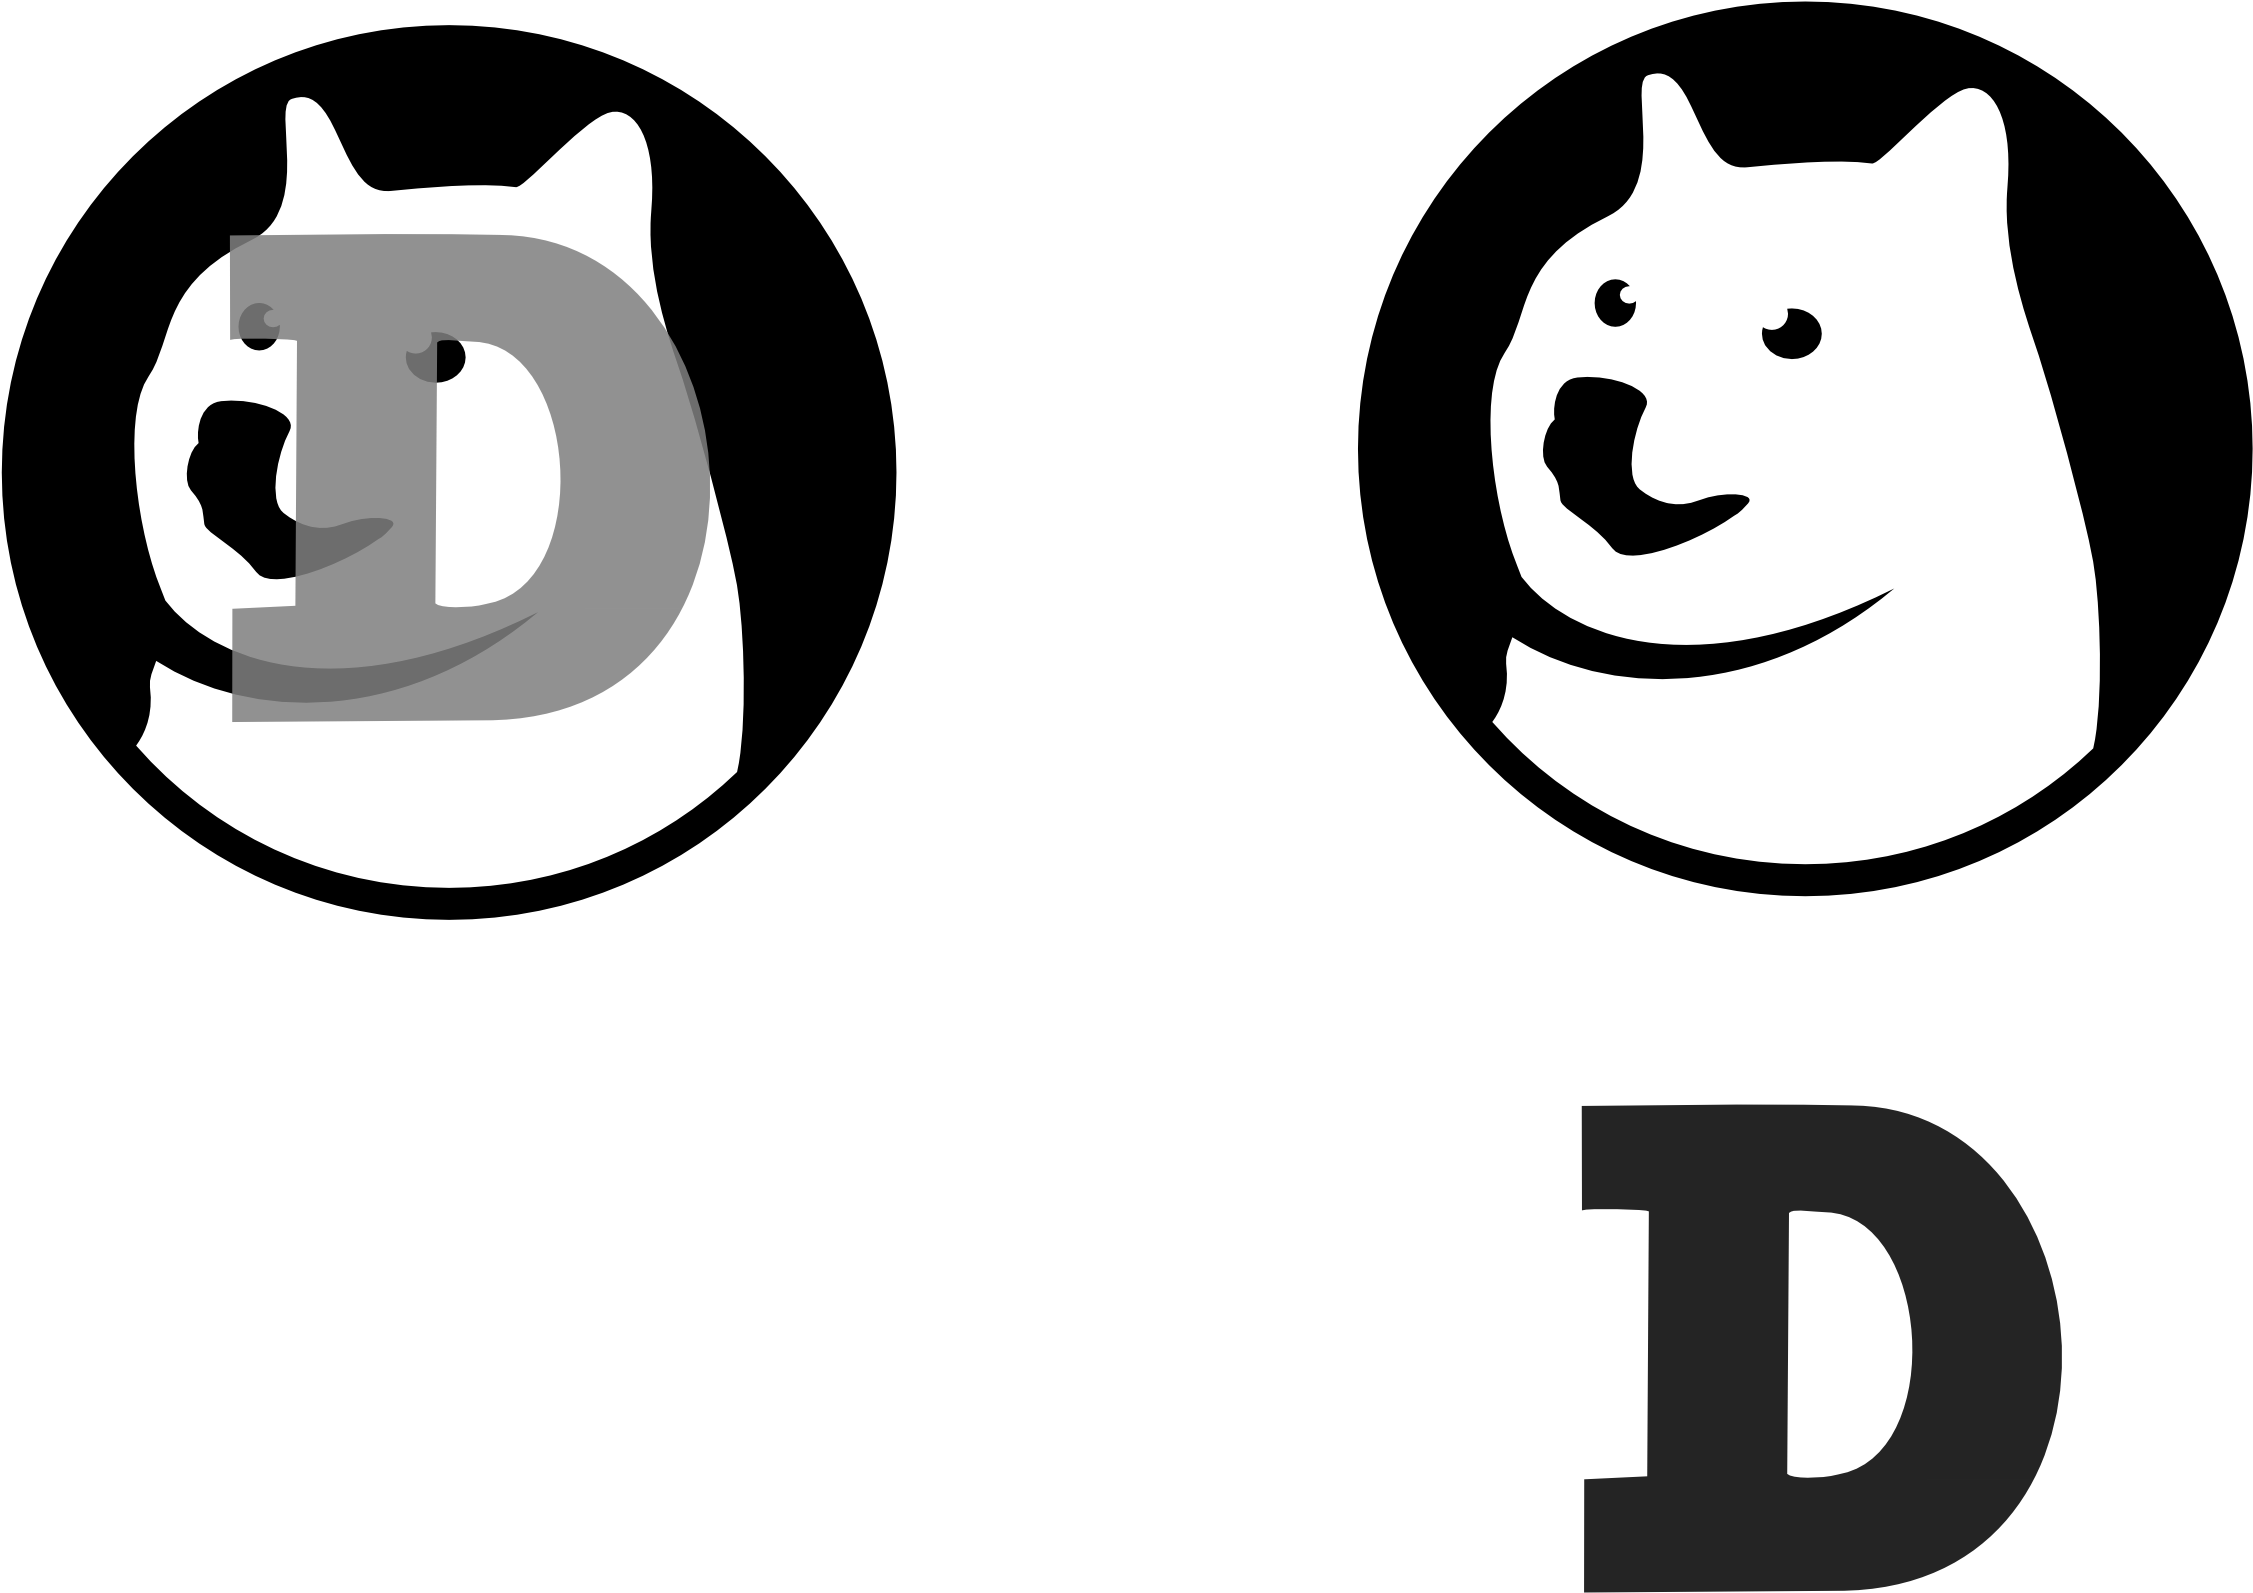 A Black And Grey Letter D